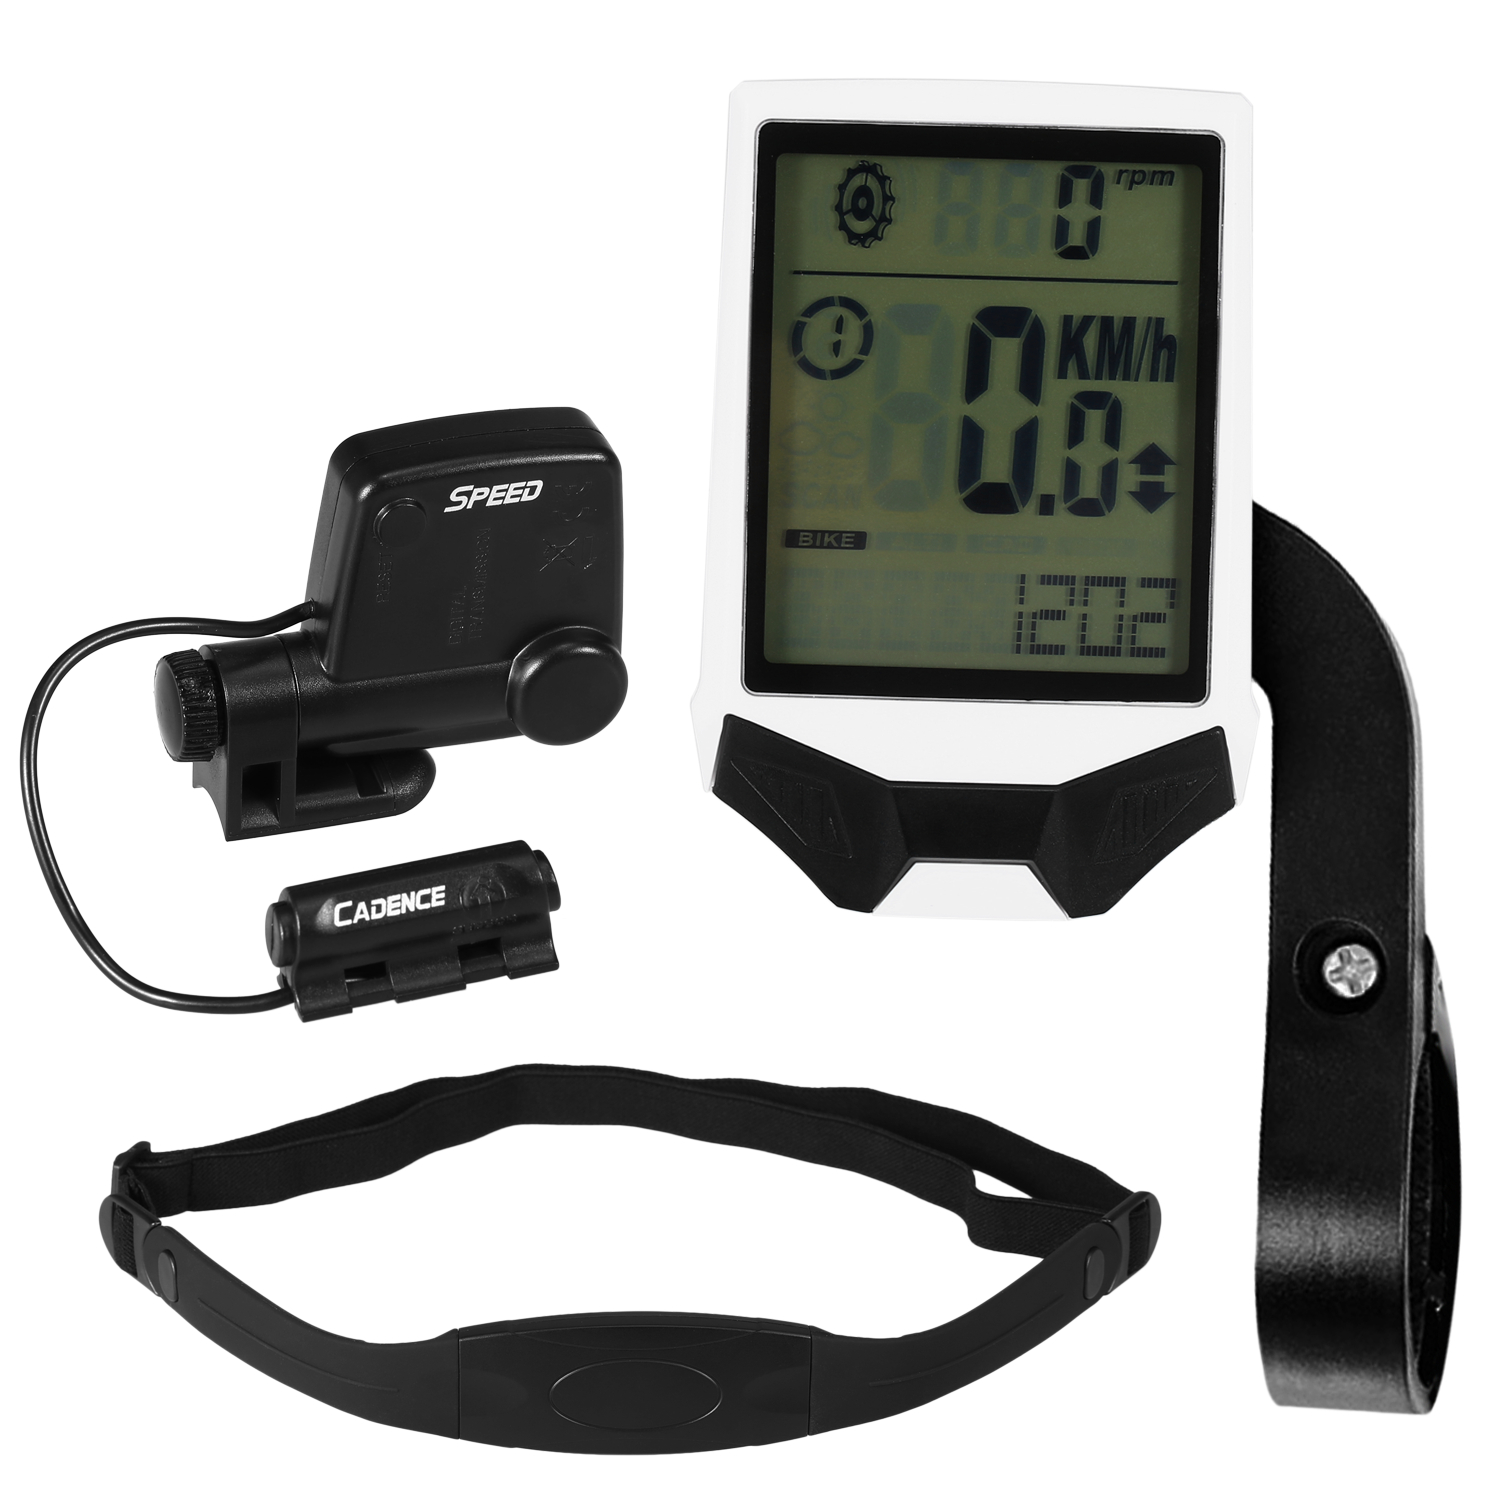 Wireless Bicycle Computer Bike Odometer Speedometer LCD Display 3 in 1 Cycling Computer With Cadence Heart Rate Monitor